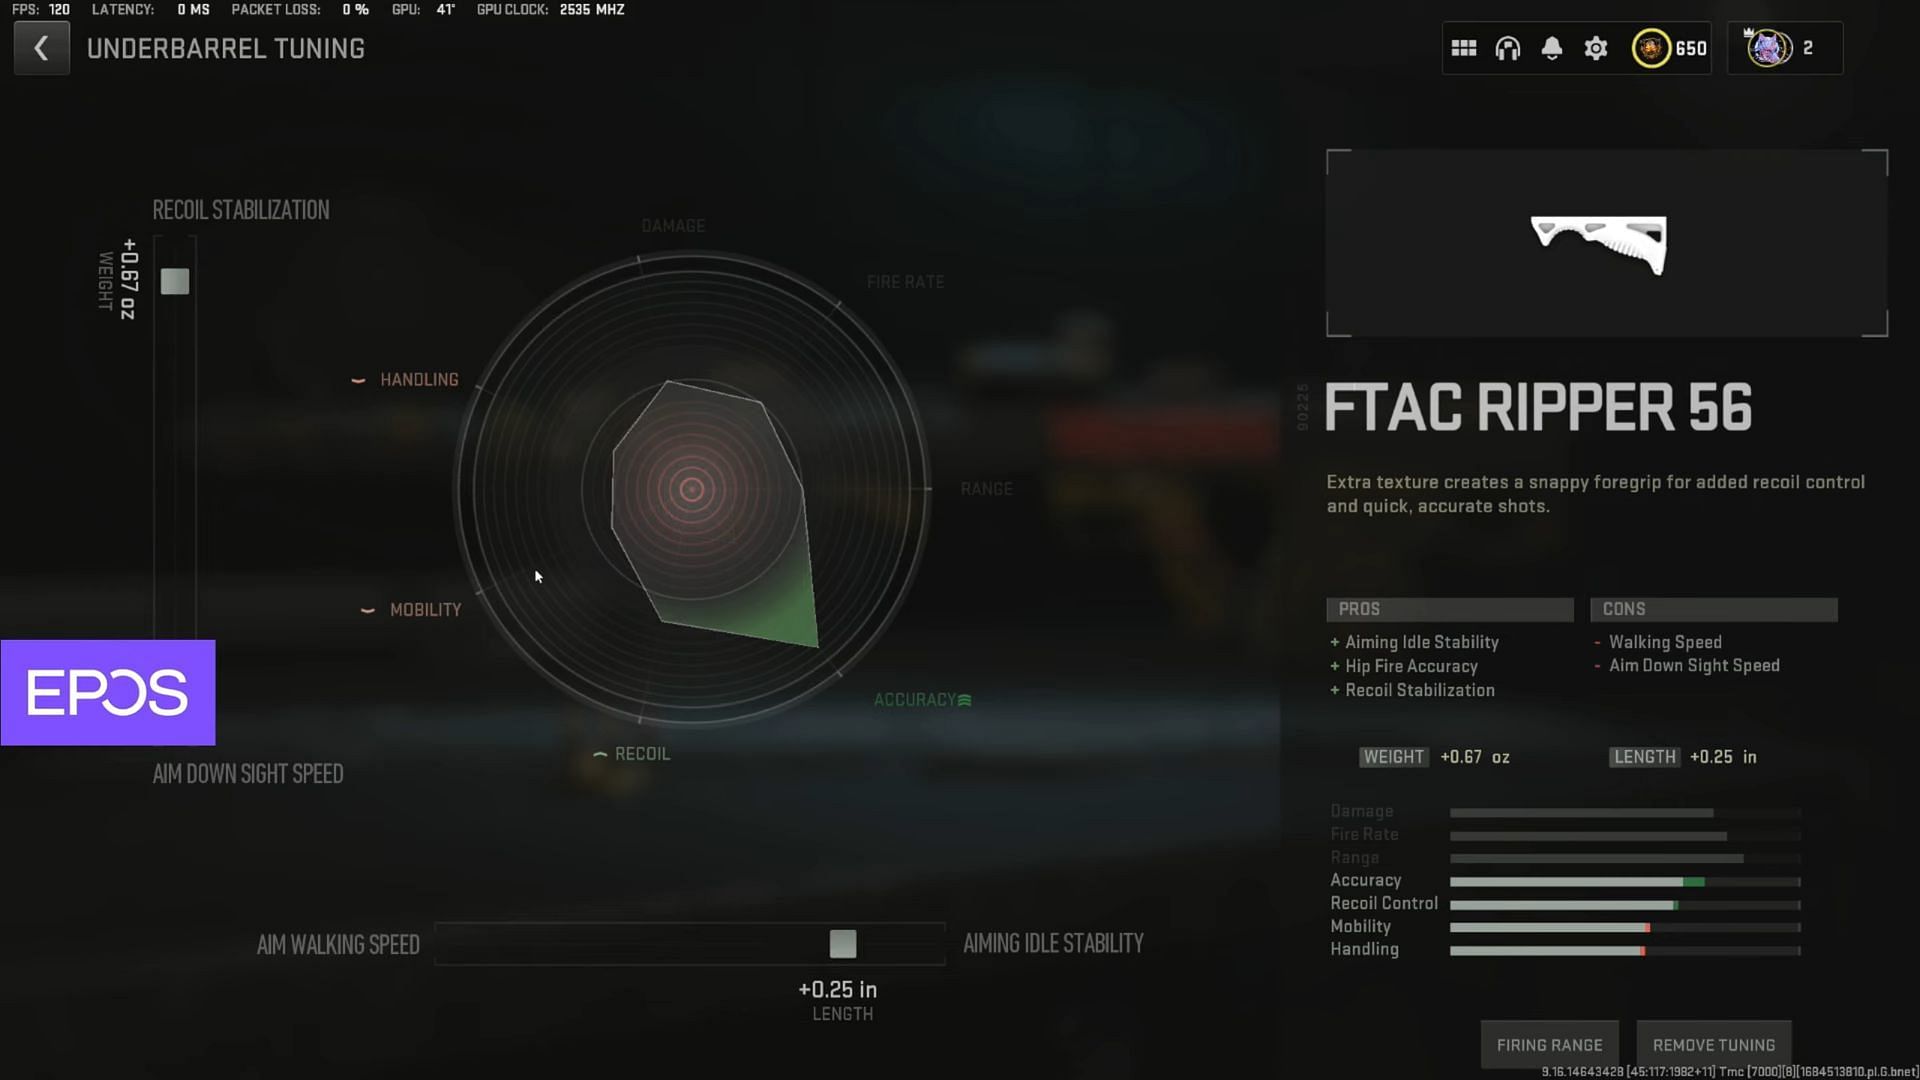 Tuning for FTAC Ripper 56 (Image via Activision and YouTube/Metaphor)